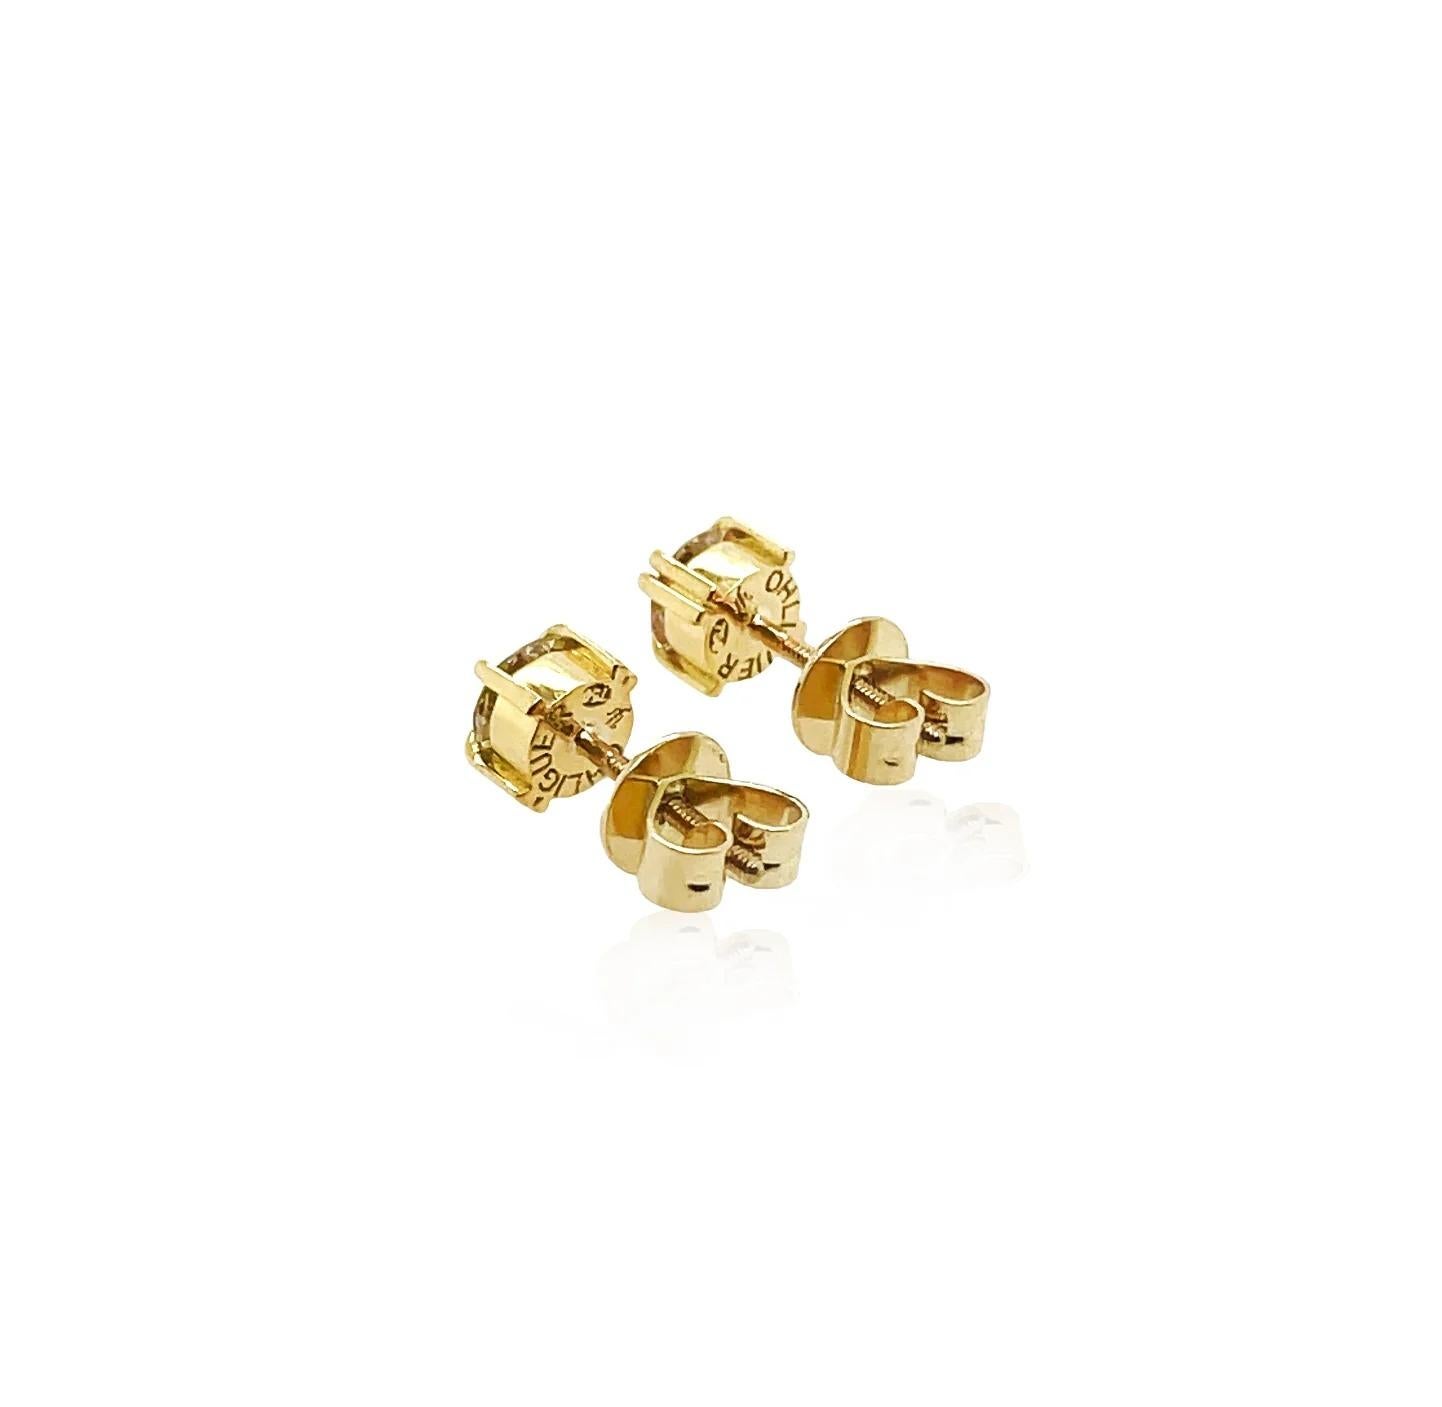 6 claw studs

18ct yellow gold 

(can rhodium white gold if you prefer as seen in picture)

0.47ct round brilliant cut diamond each natural mined diamonds 

total 0.94ct

Cleaned and polished like new by jeweller

threaded post and butterfly so they